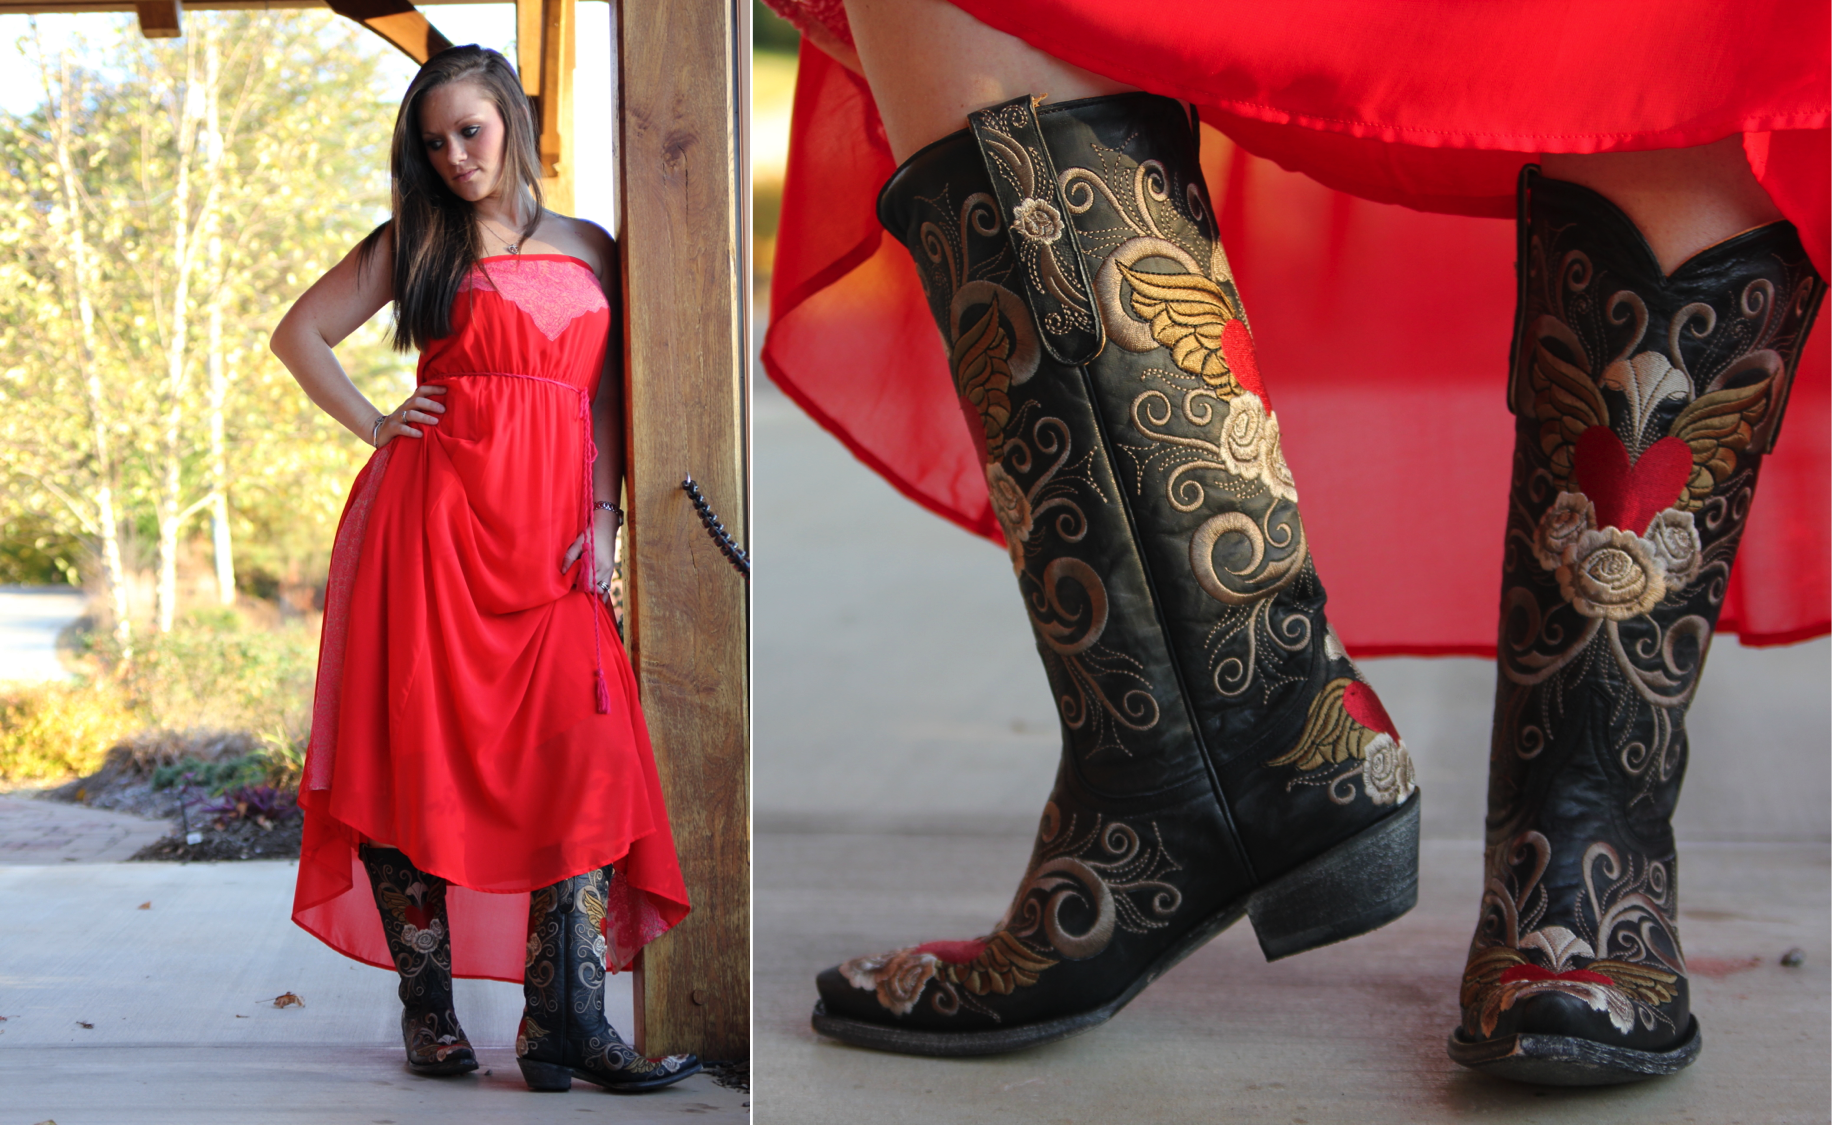 The Maxi Dress and the Cowboy Boot